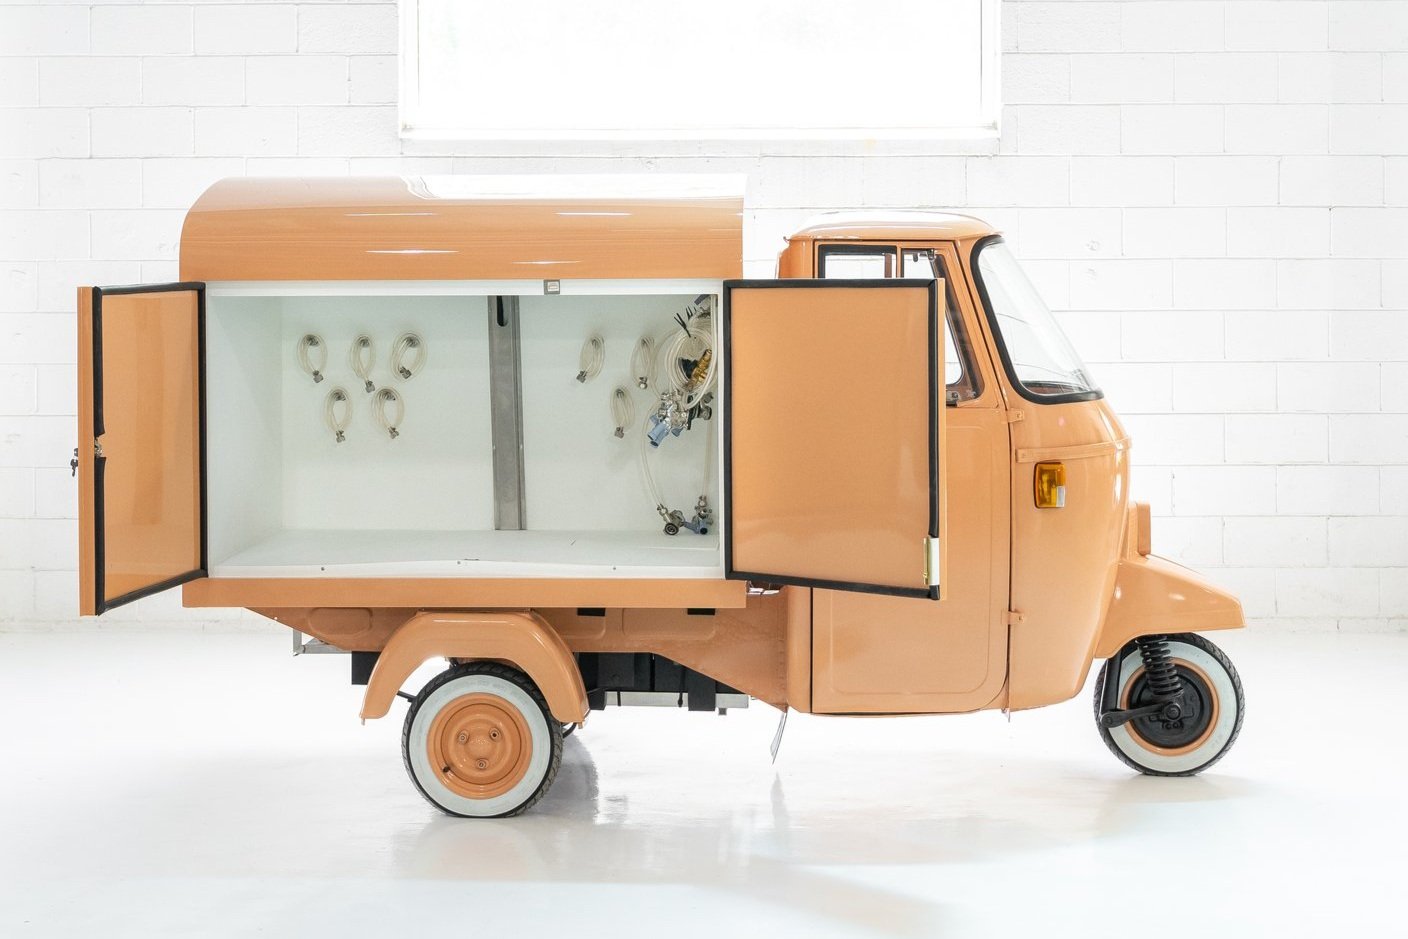 Turn key - 1972 Piaggio Ape 50 Beverage Edition + Trailer and other  accesories — Silverside Design